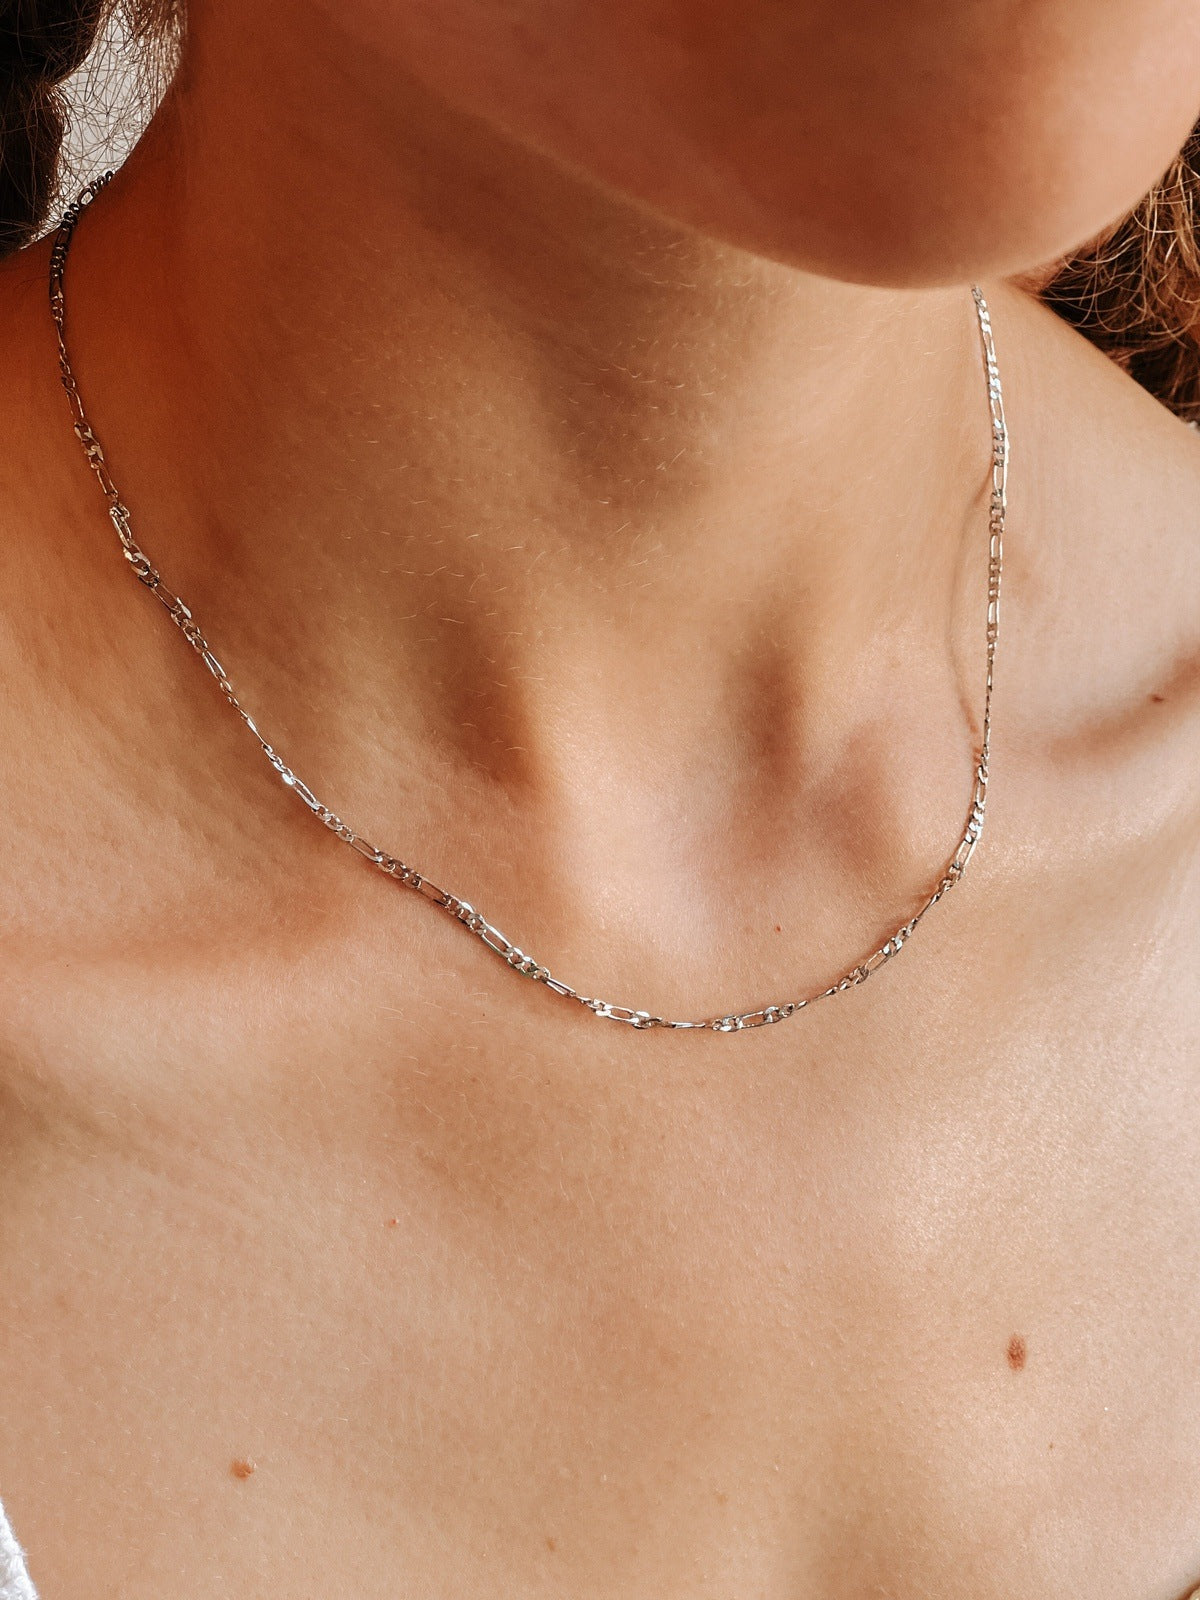 Rhodium Filled Layering Chains Necklaces